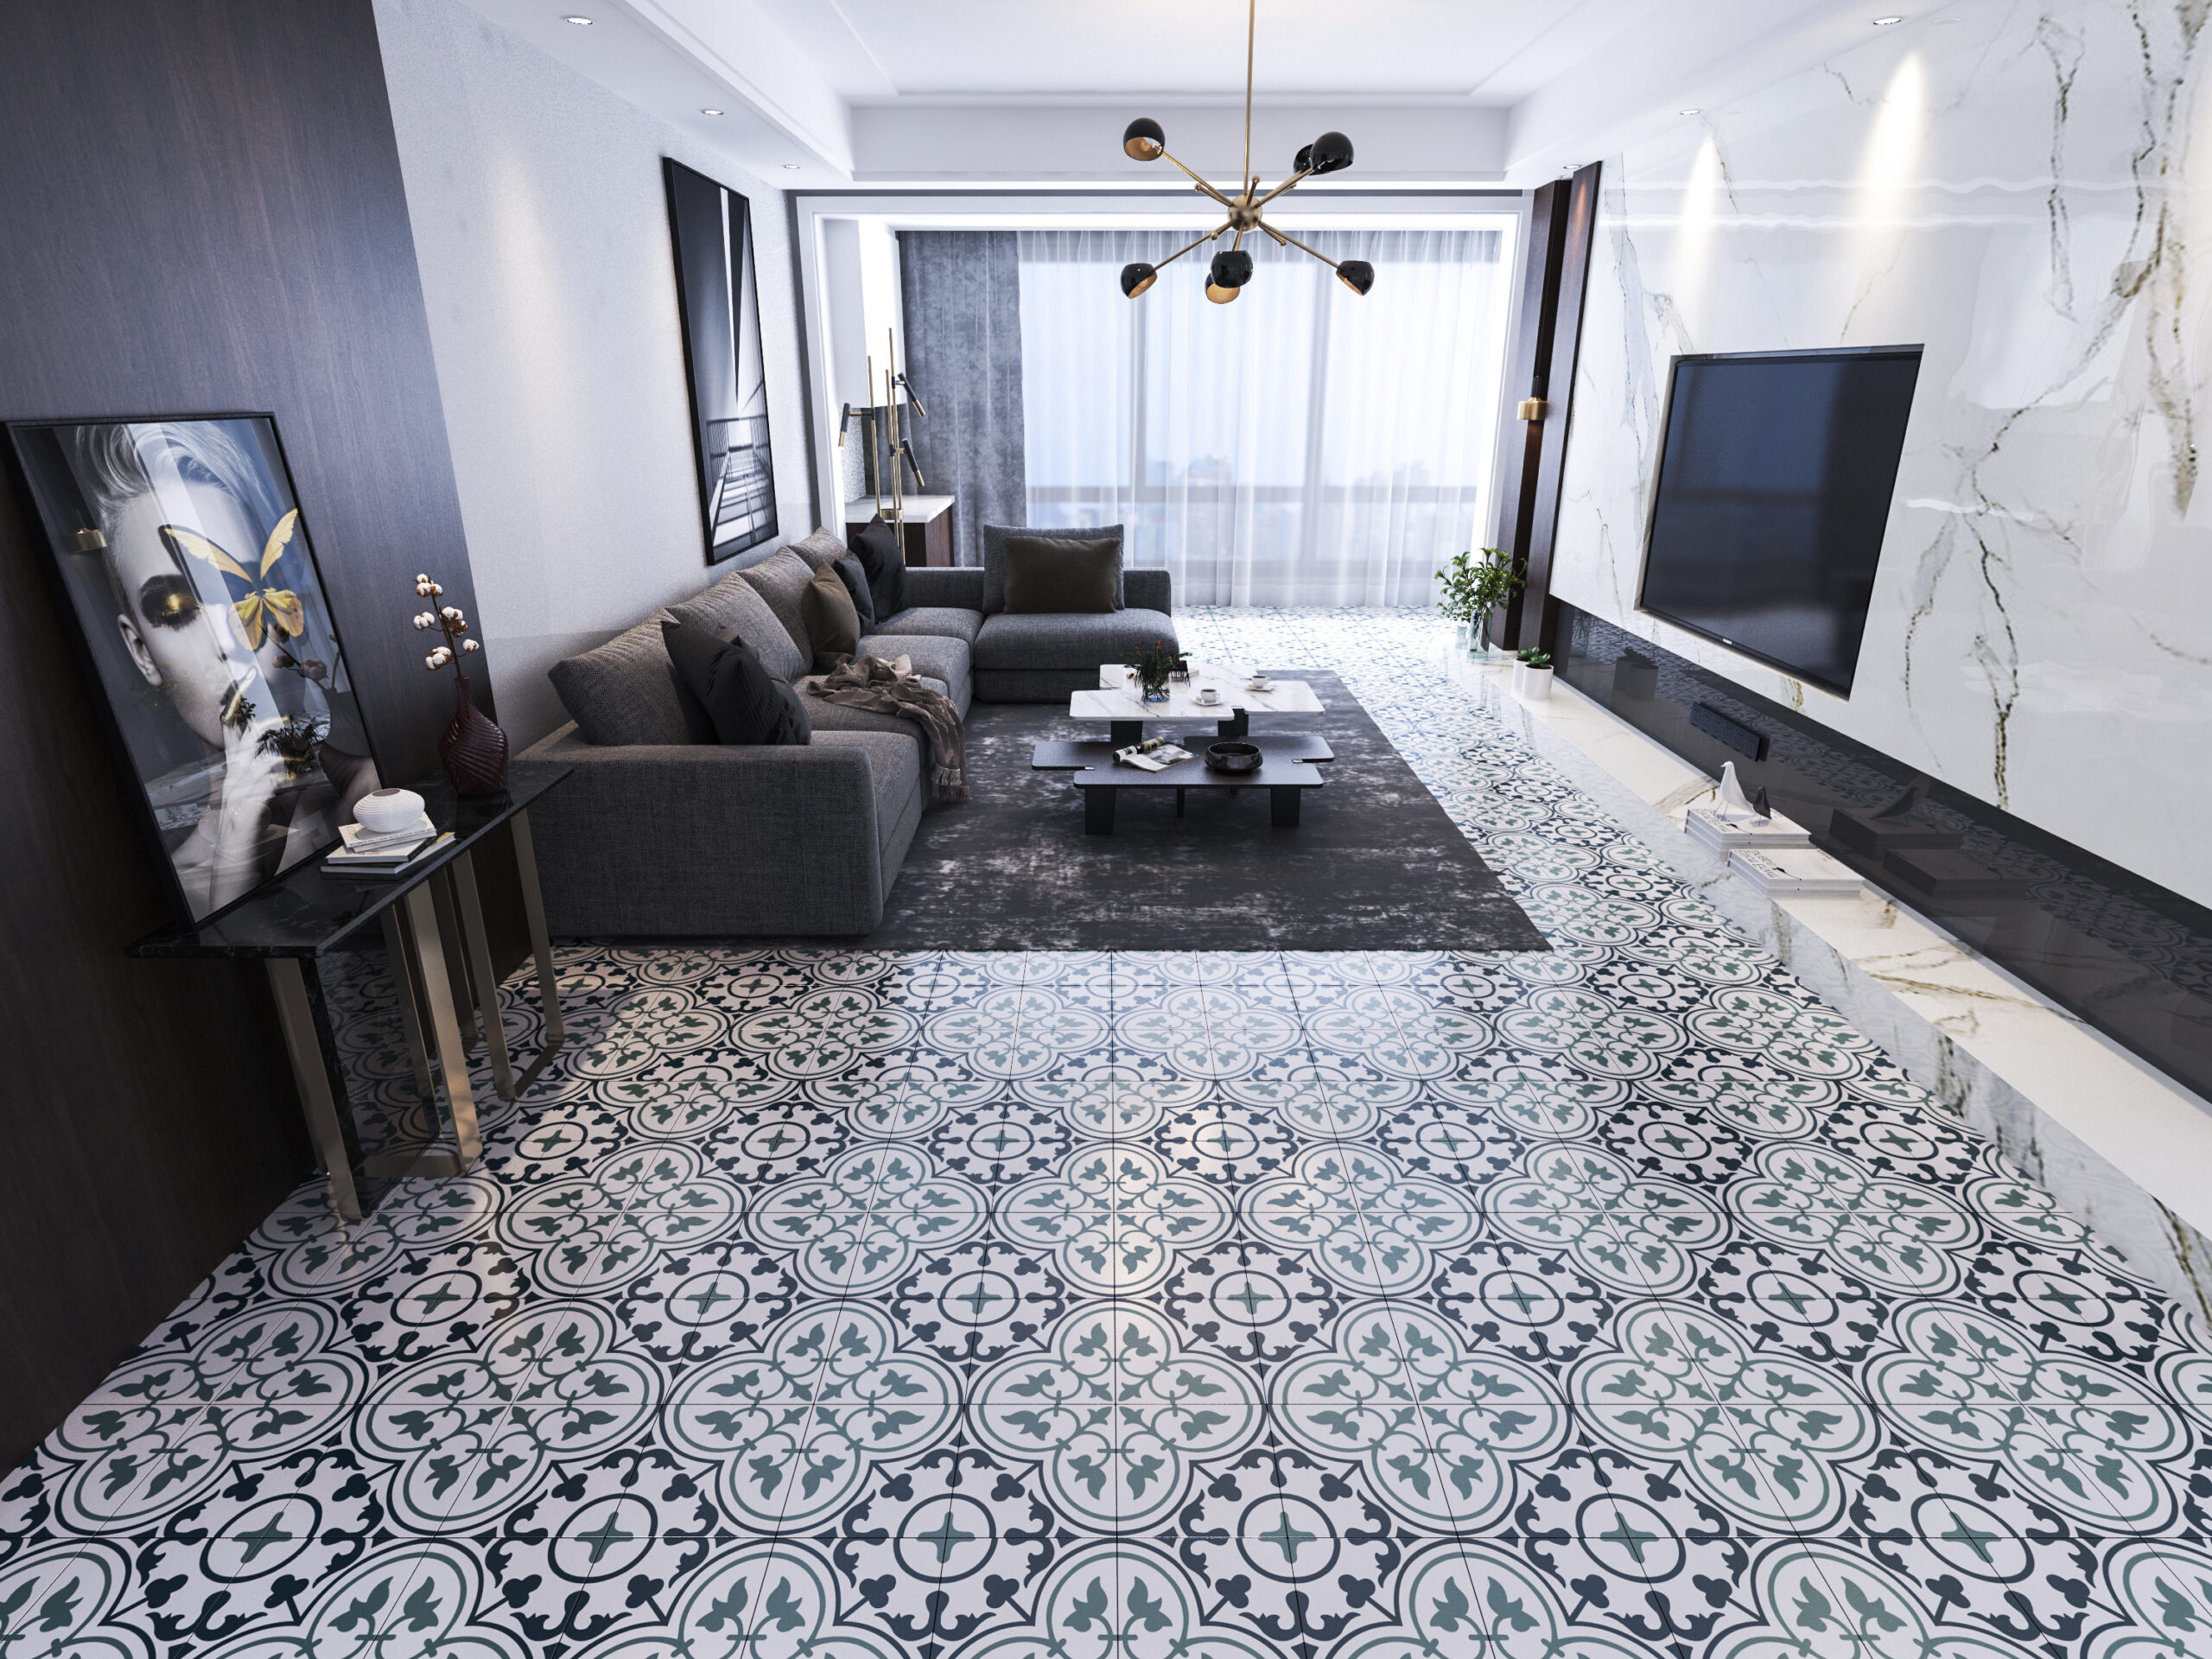 Tiles in Living Room scaled Cement tile Ref. M 102 (F,T,Y,M)